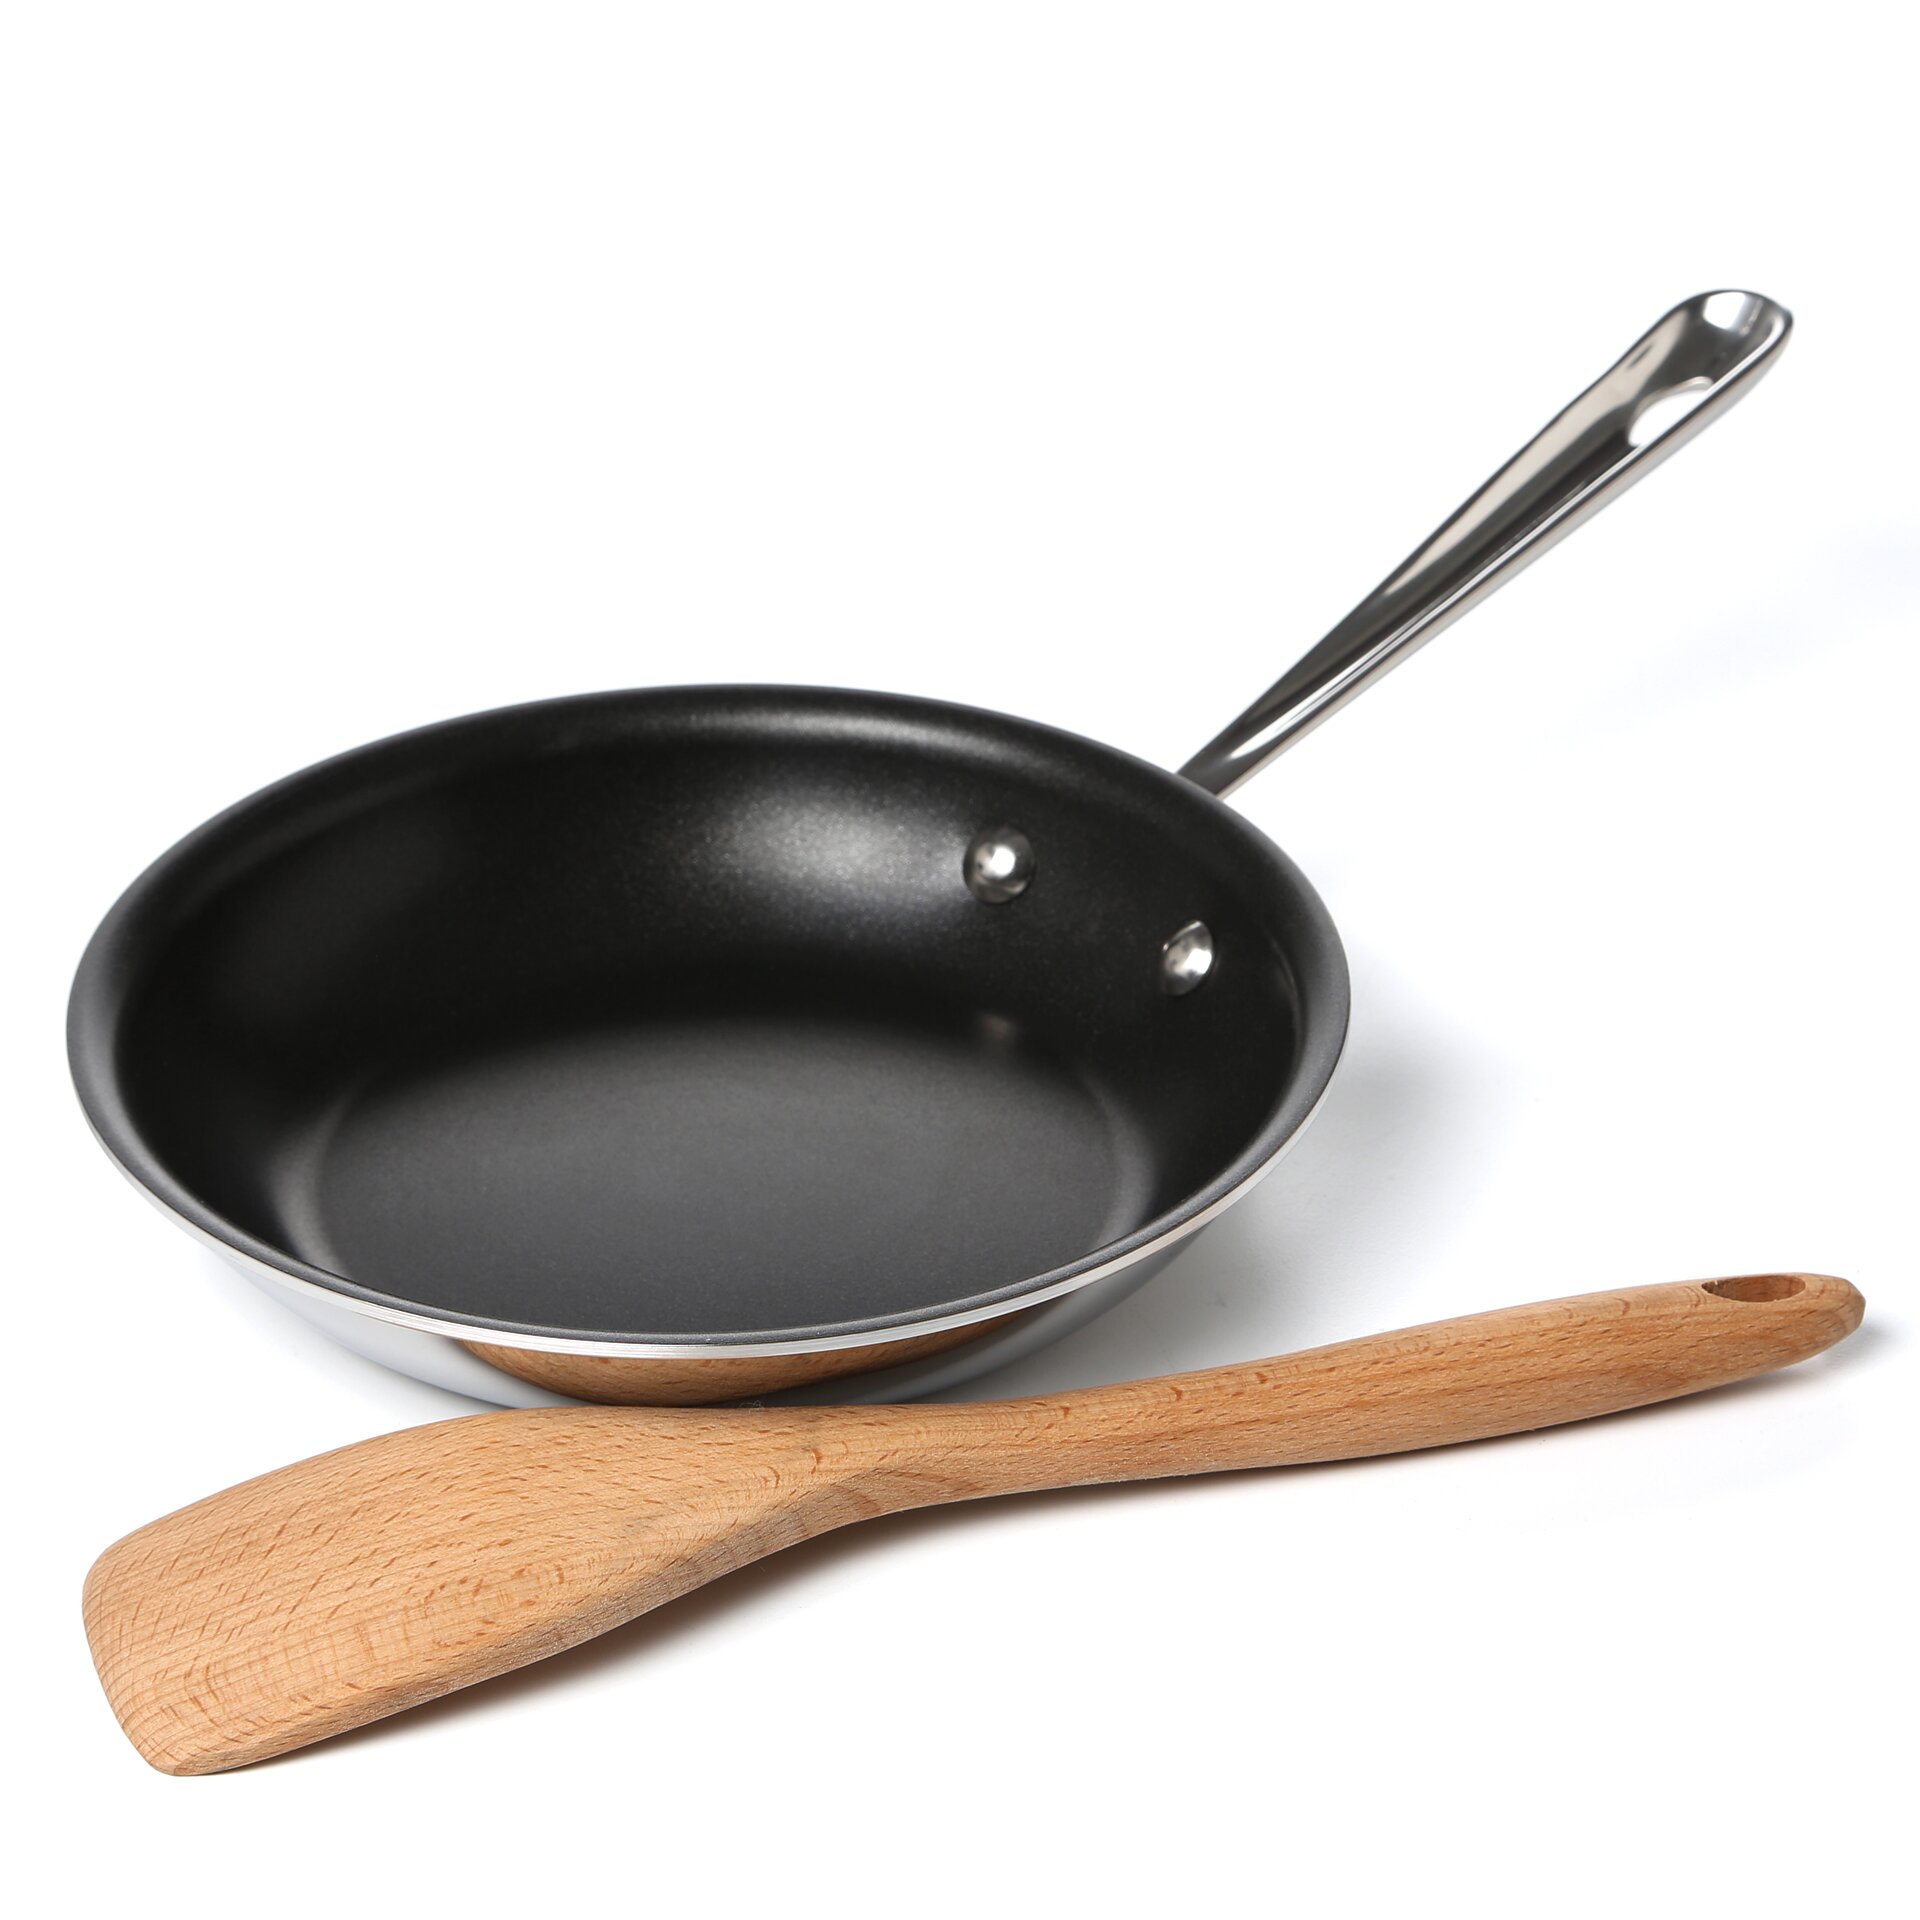 All-Clad Stainless Steel Nonstick Fry Pan & Reviews | Wayfair All-clad Stainless Steel Fry Pan